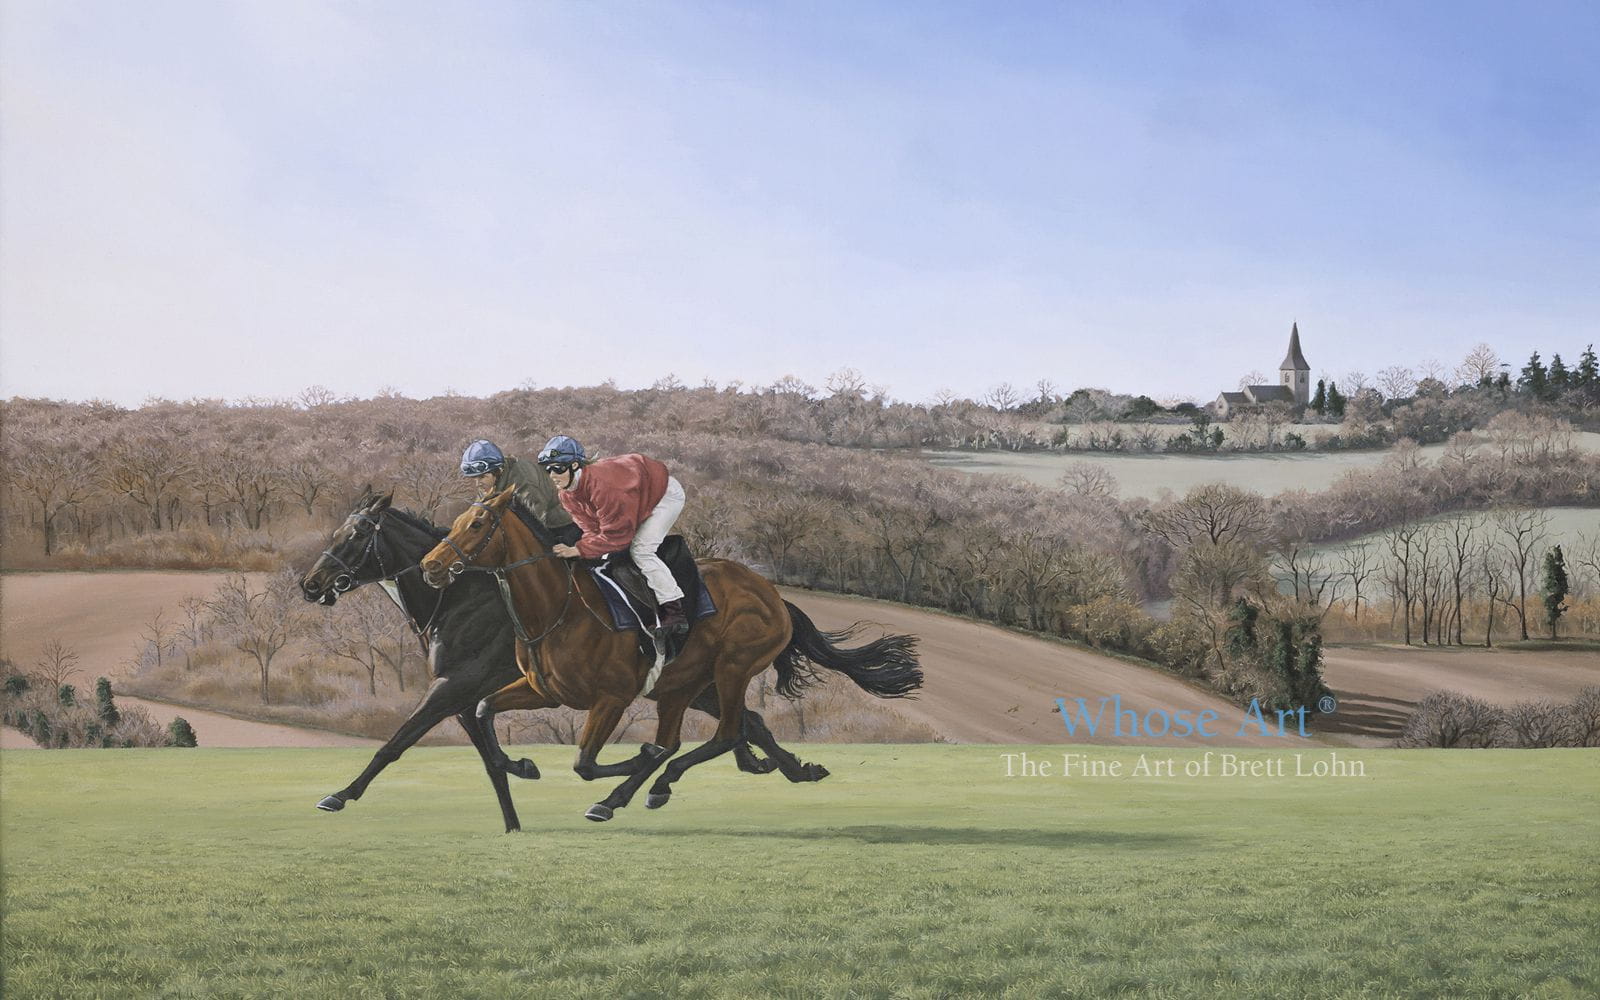 painting of horses training on the gallops at Epsom Downs